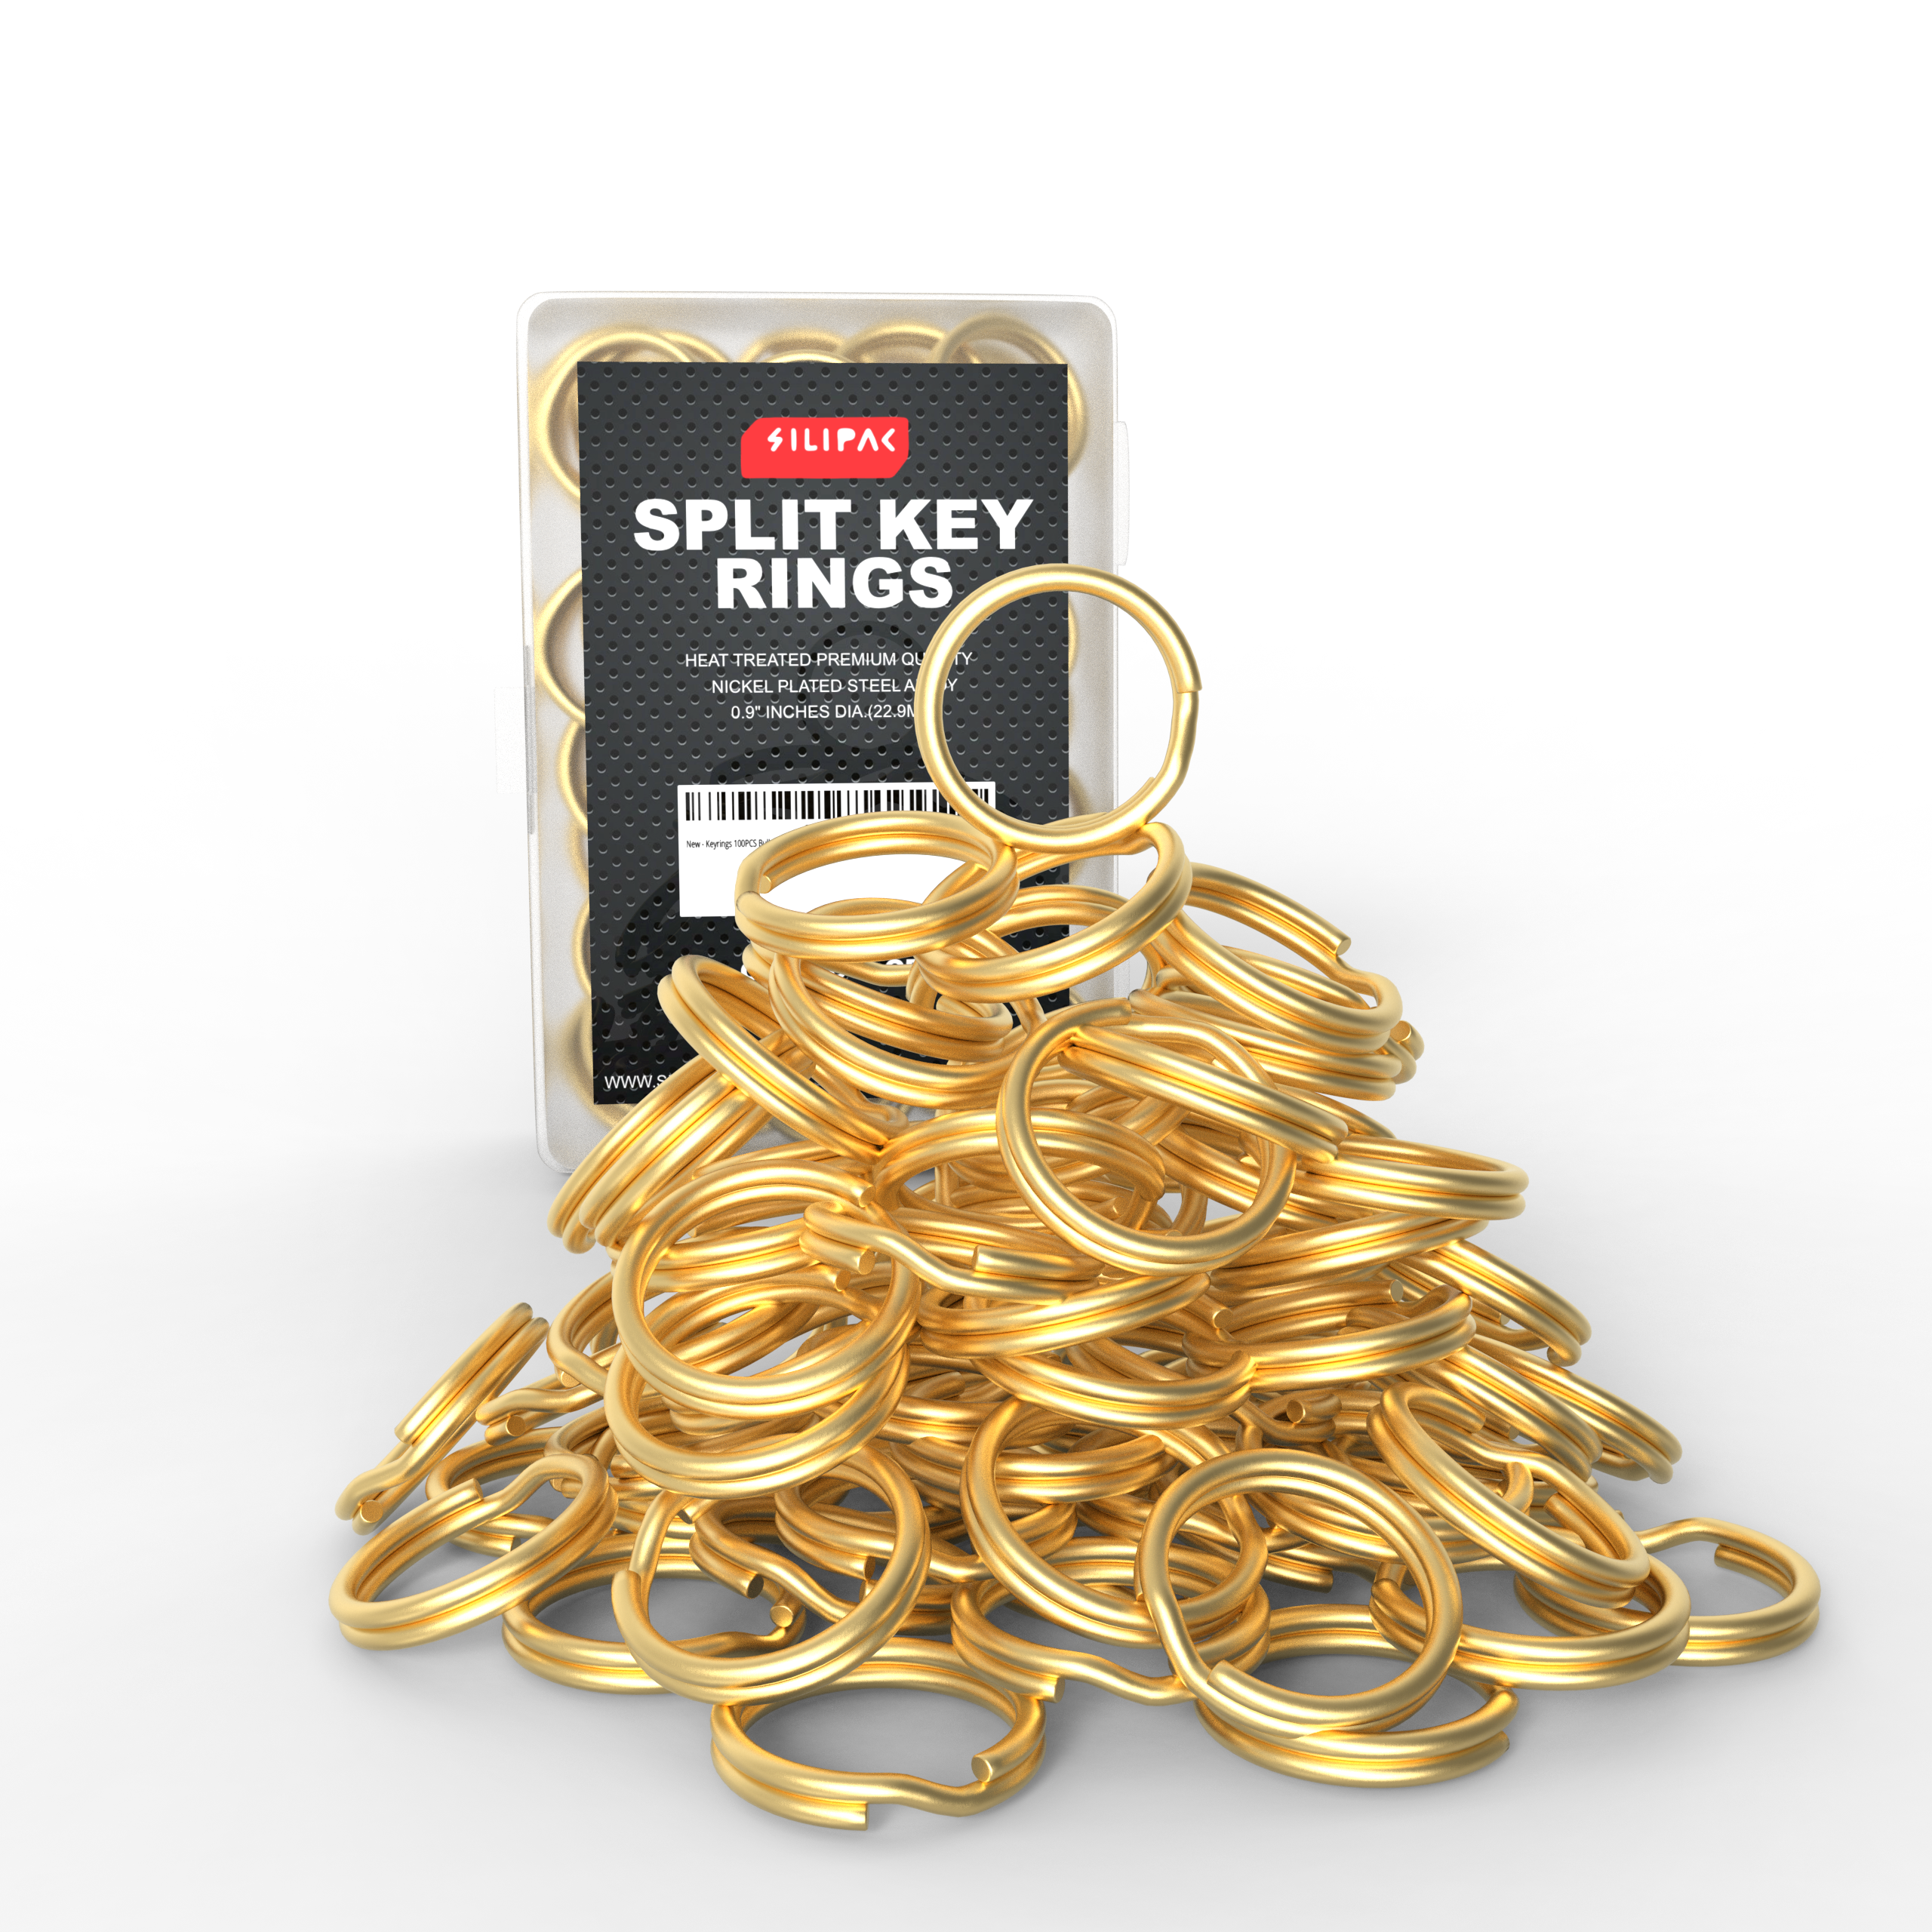 25 Gold Split Key Rings 7/8 Inch - Top Quality Strong Key Ring